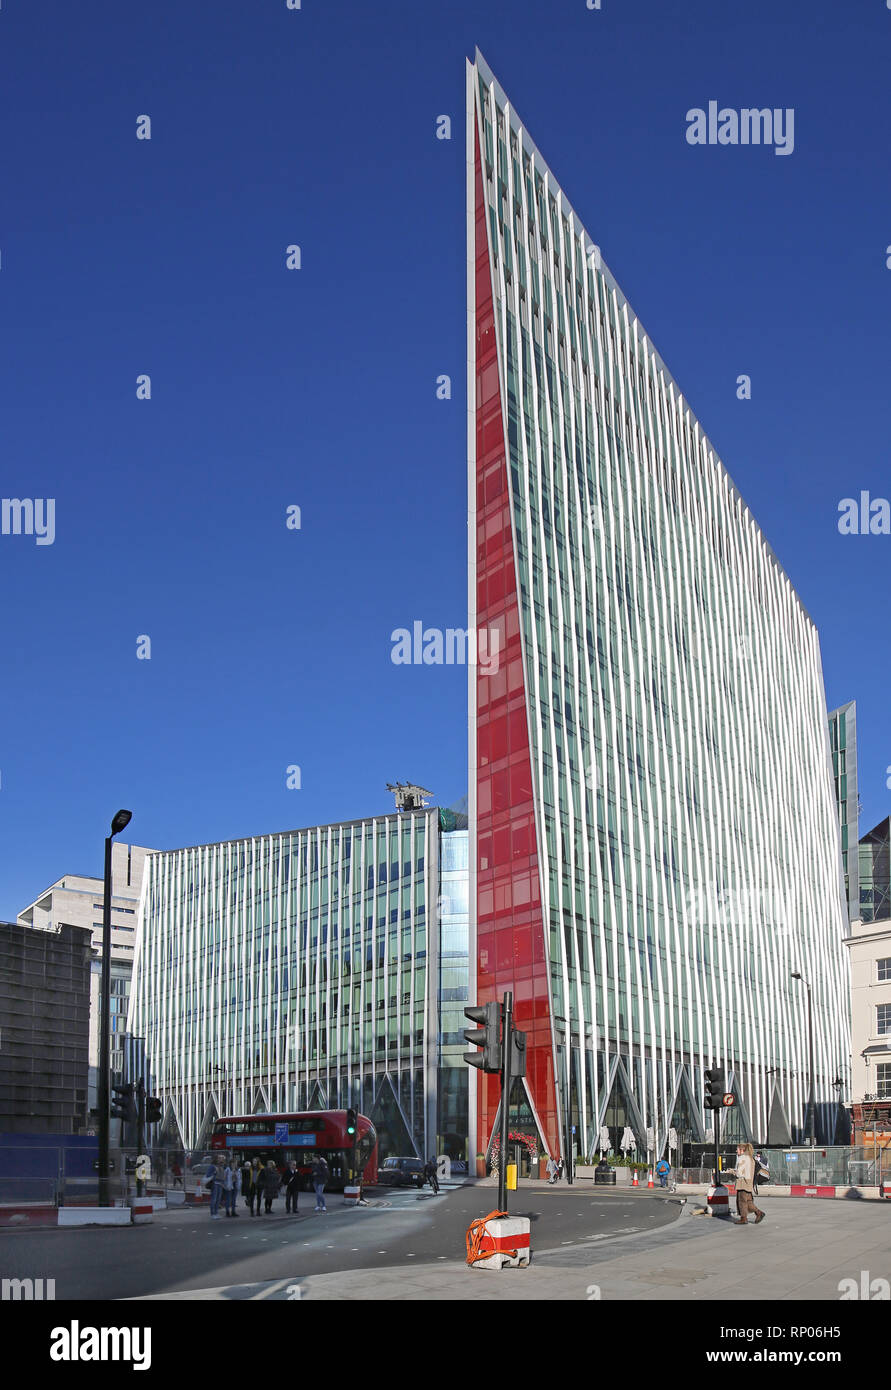 The recently completed Nova development oposite Victoria Station in London, UK, designed by PLP Architecture. Contains shops, offices and apartments. Stock Photo